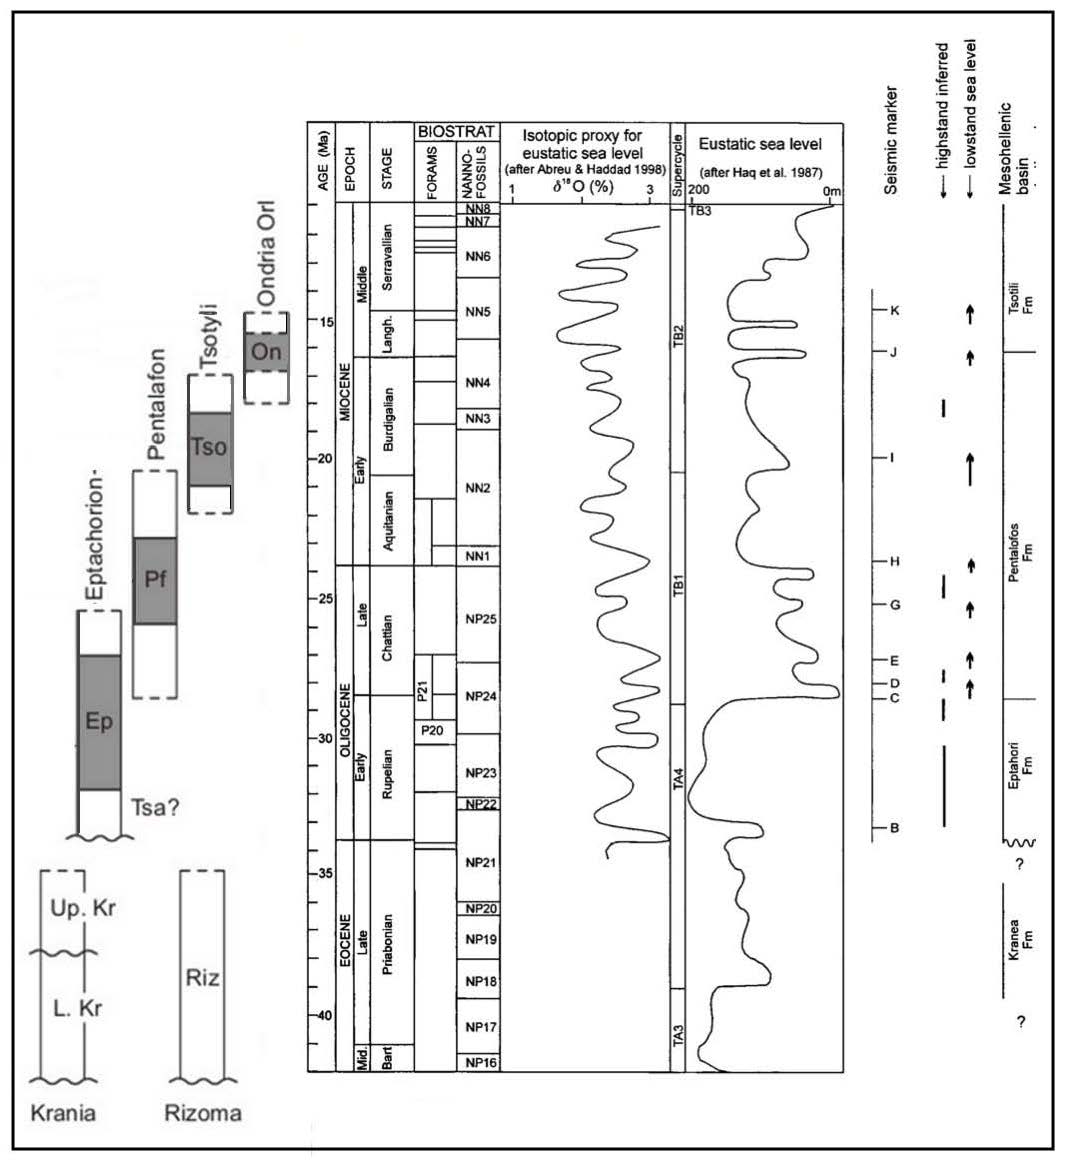 Eustatic sea level variations compared to the MHB lithologic formations ages